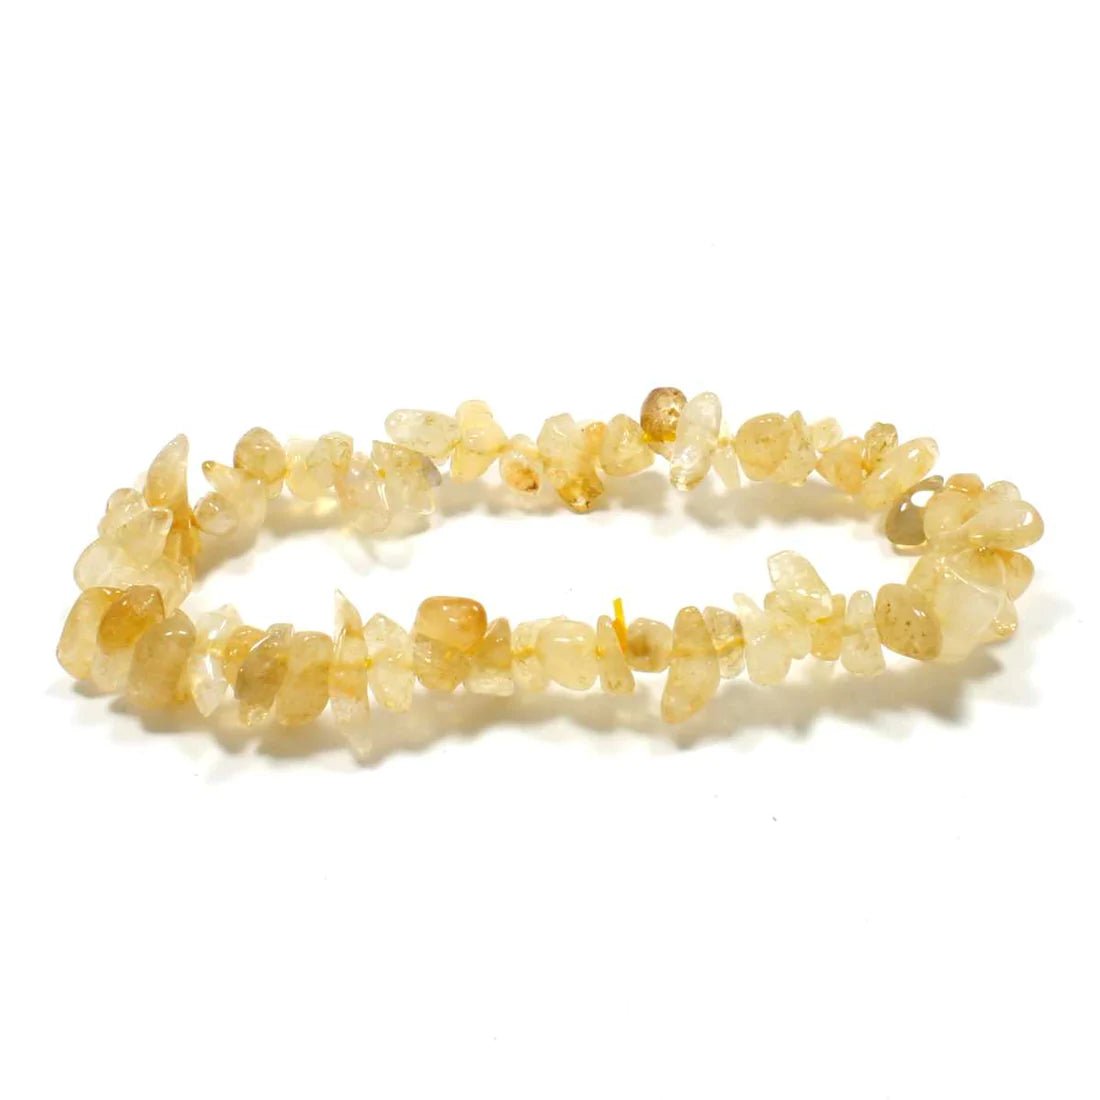 Chipstone Bracelet - Citrine - CBA99 - The Hare and the Moon